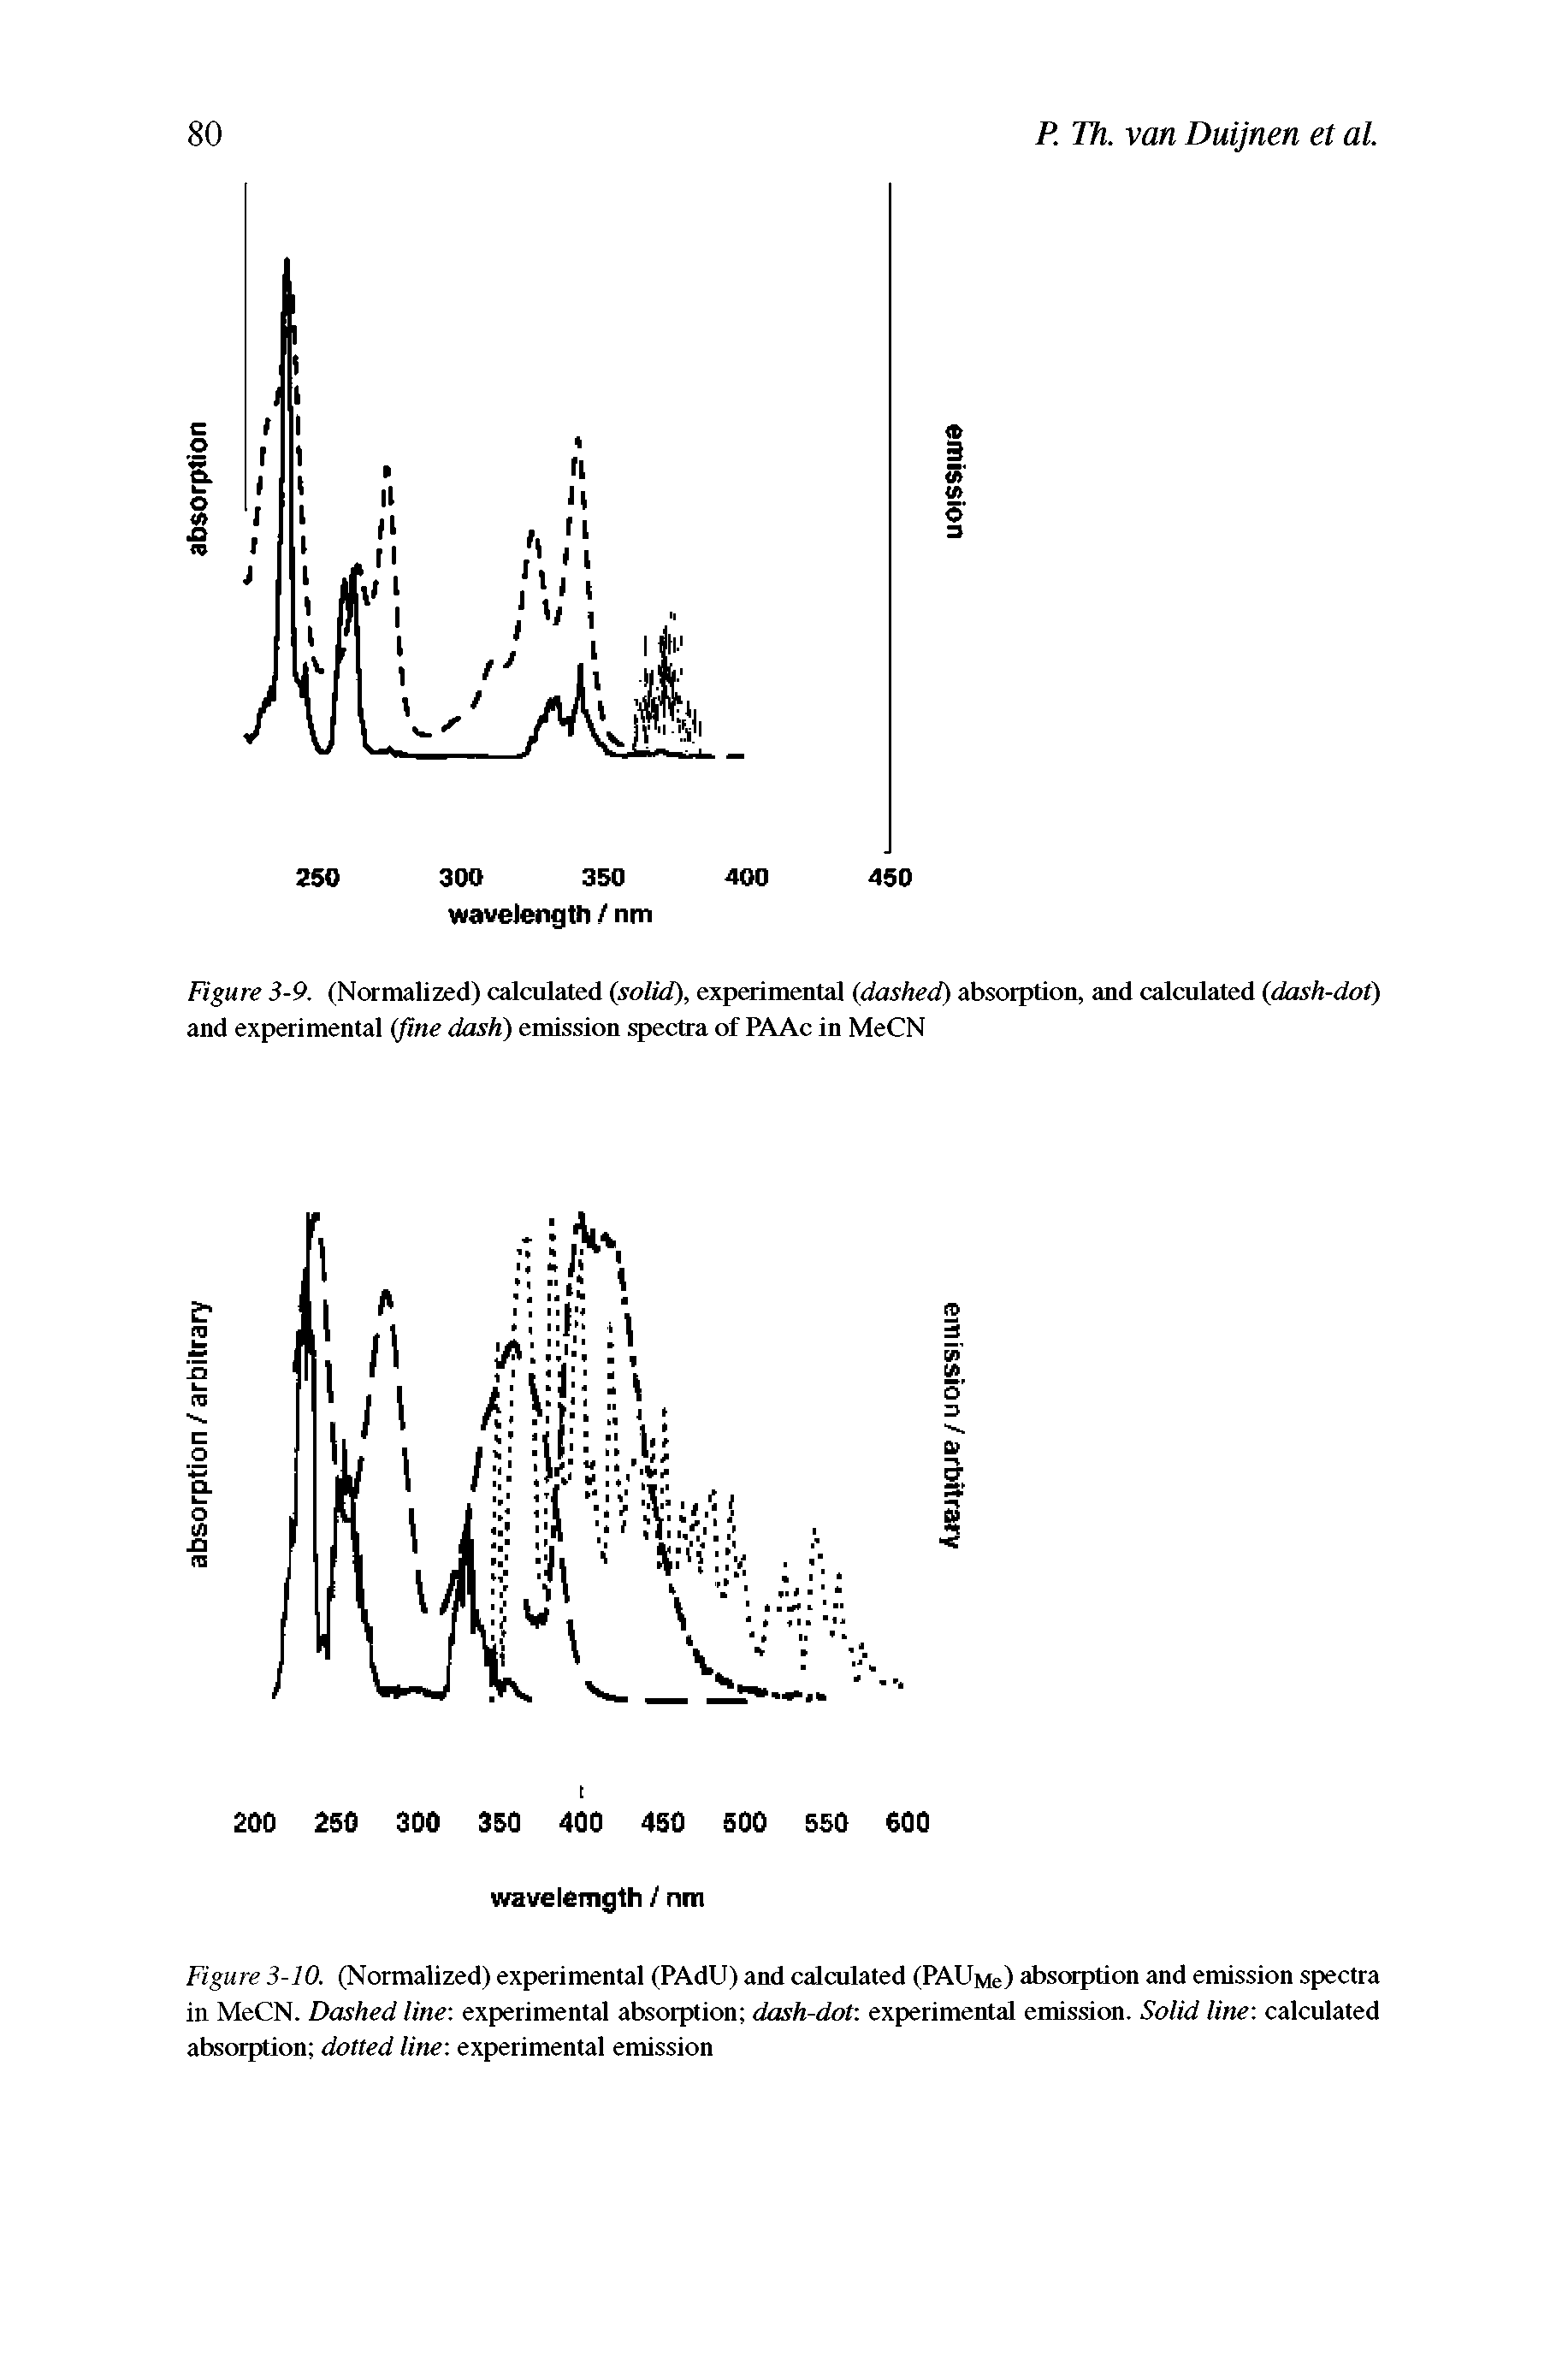 Figure 3-10. (Normalized) experimental (PAdU) and calculated (PAUMe) absorption and emission spectra in MeCN. Dashed line experimental absorption dash-dot experimental emission. Solid line calculated absorption dotted line experimental emission...